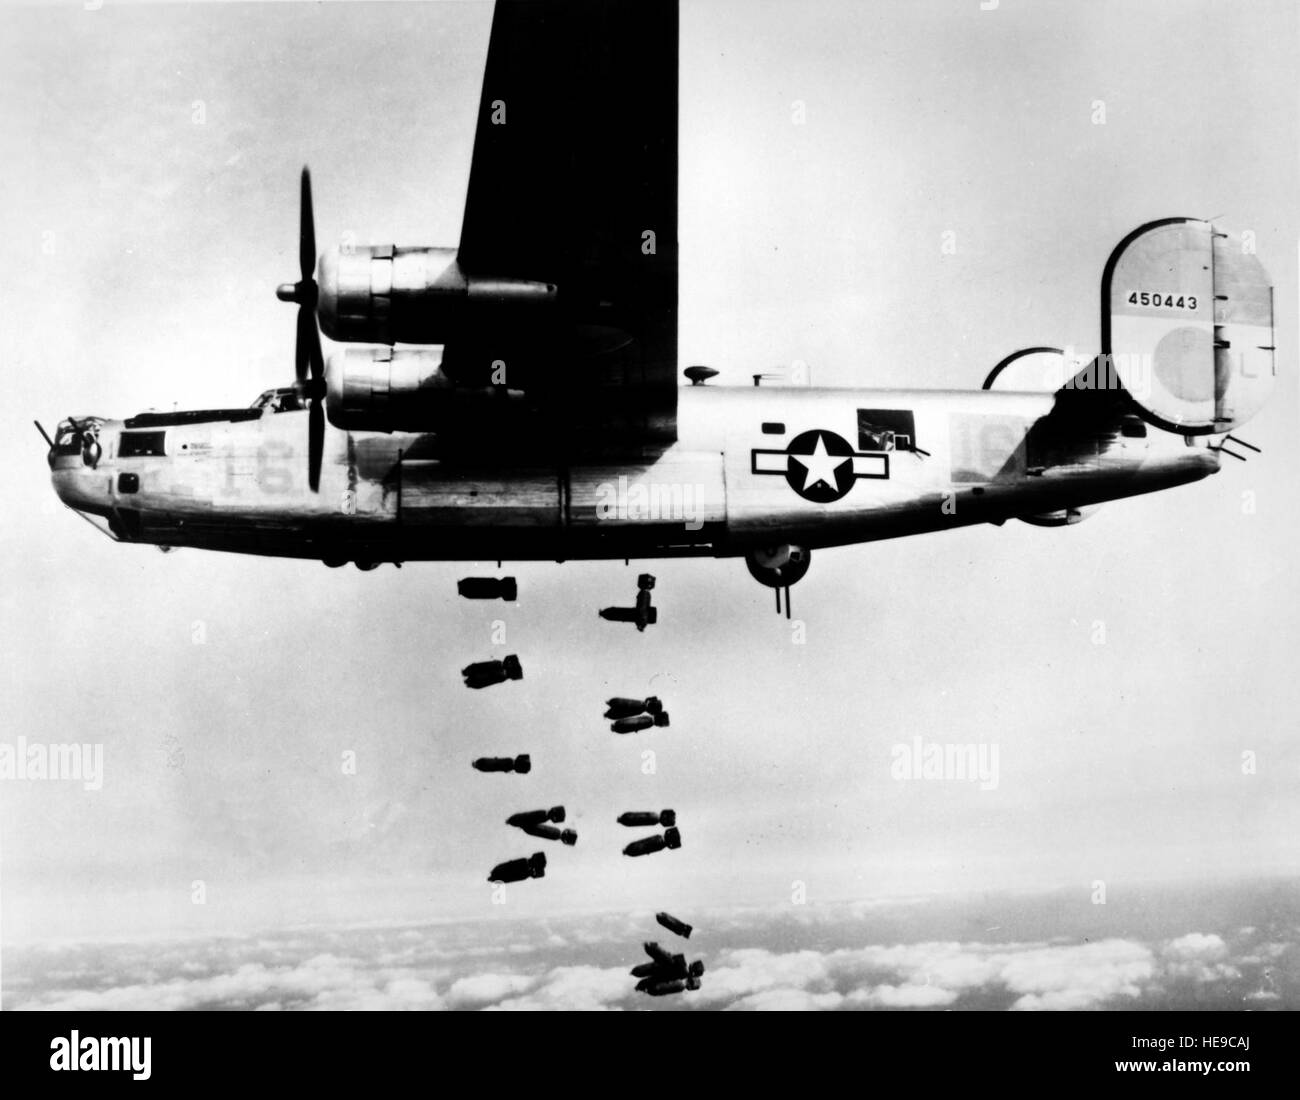 War Theatre #12 (Muhldorf, Germany) BOMBING A consolidated B-24 Liberator of the 15th A.F. releases its bombs on the railyards at Muhldorf, Germany on 19 March 1945.  Bombers of the 15th A.F. are slicing vital rail lines from Vienna to Munich as the air offensive against the enemy reaches an all time high. Stock Photo